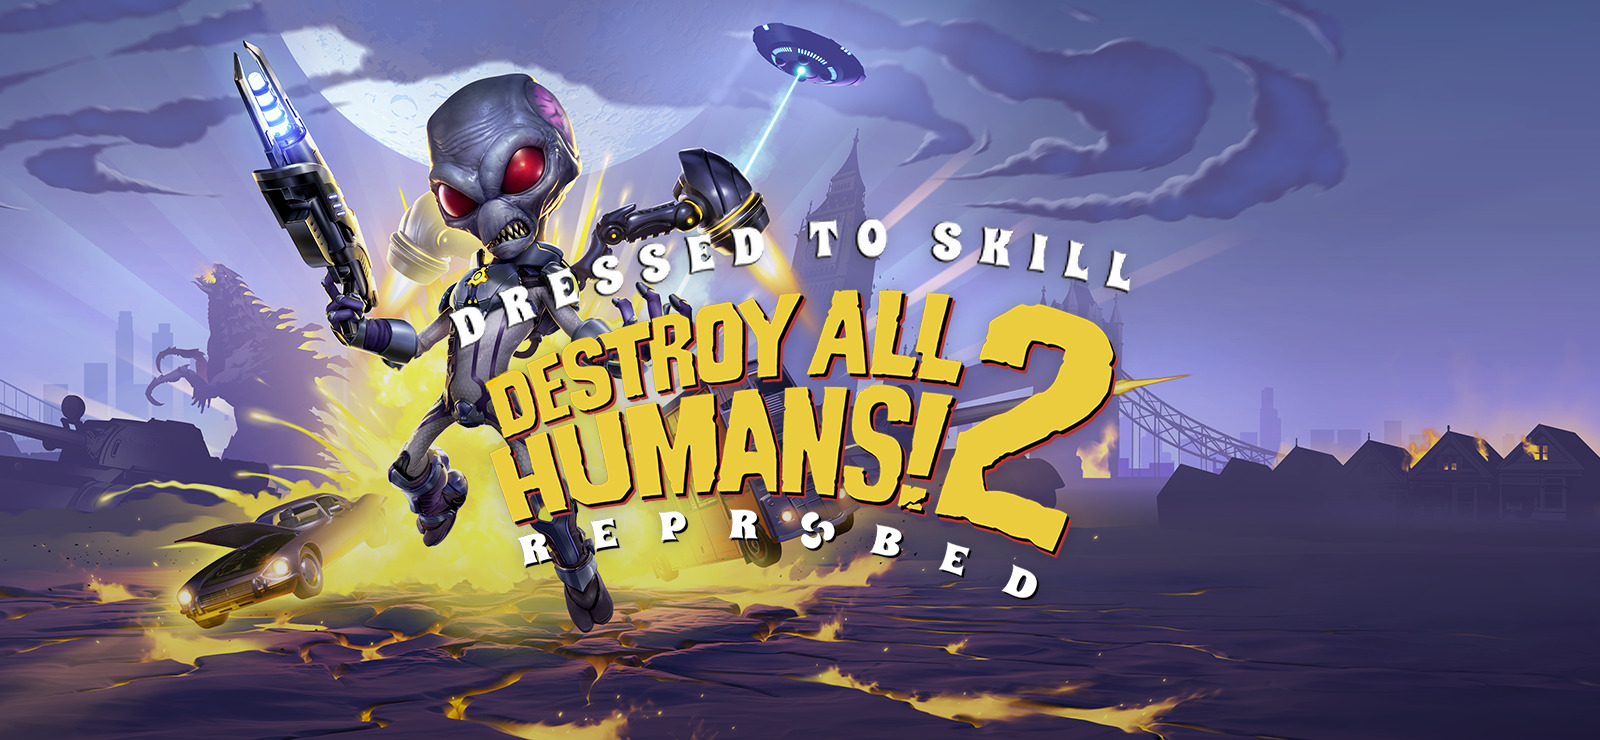  Destroy All Humans 2! - Reprobed - 2nd Coming Edition